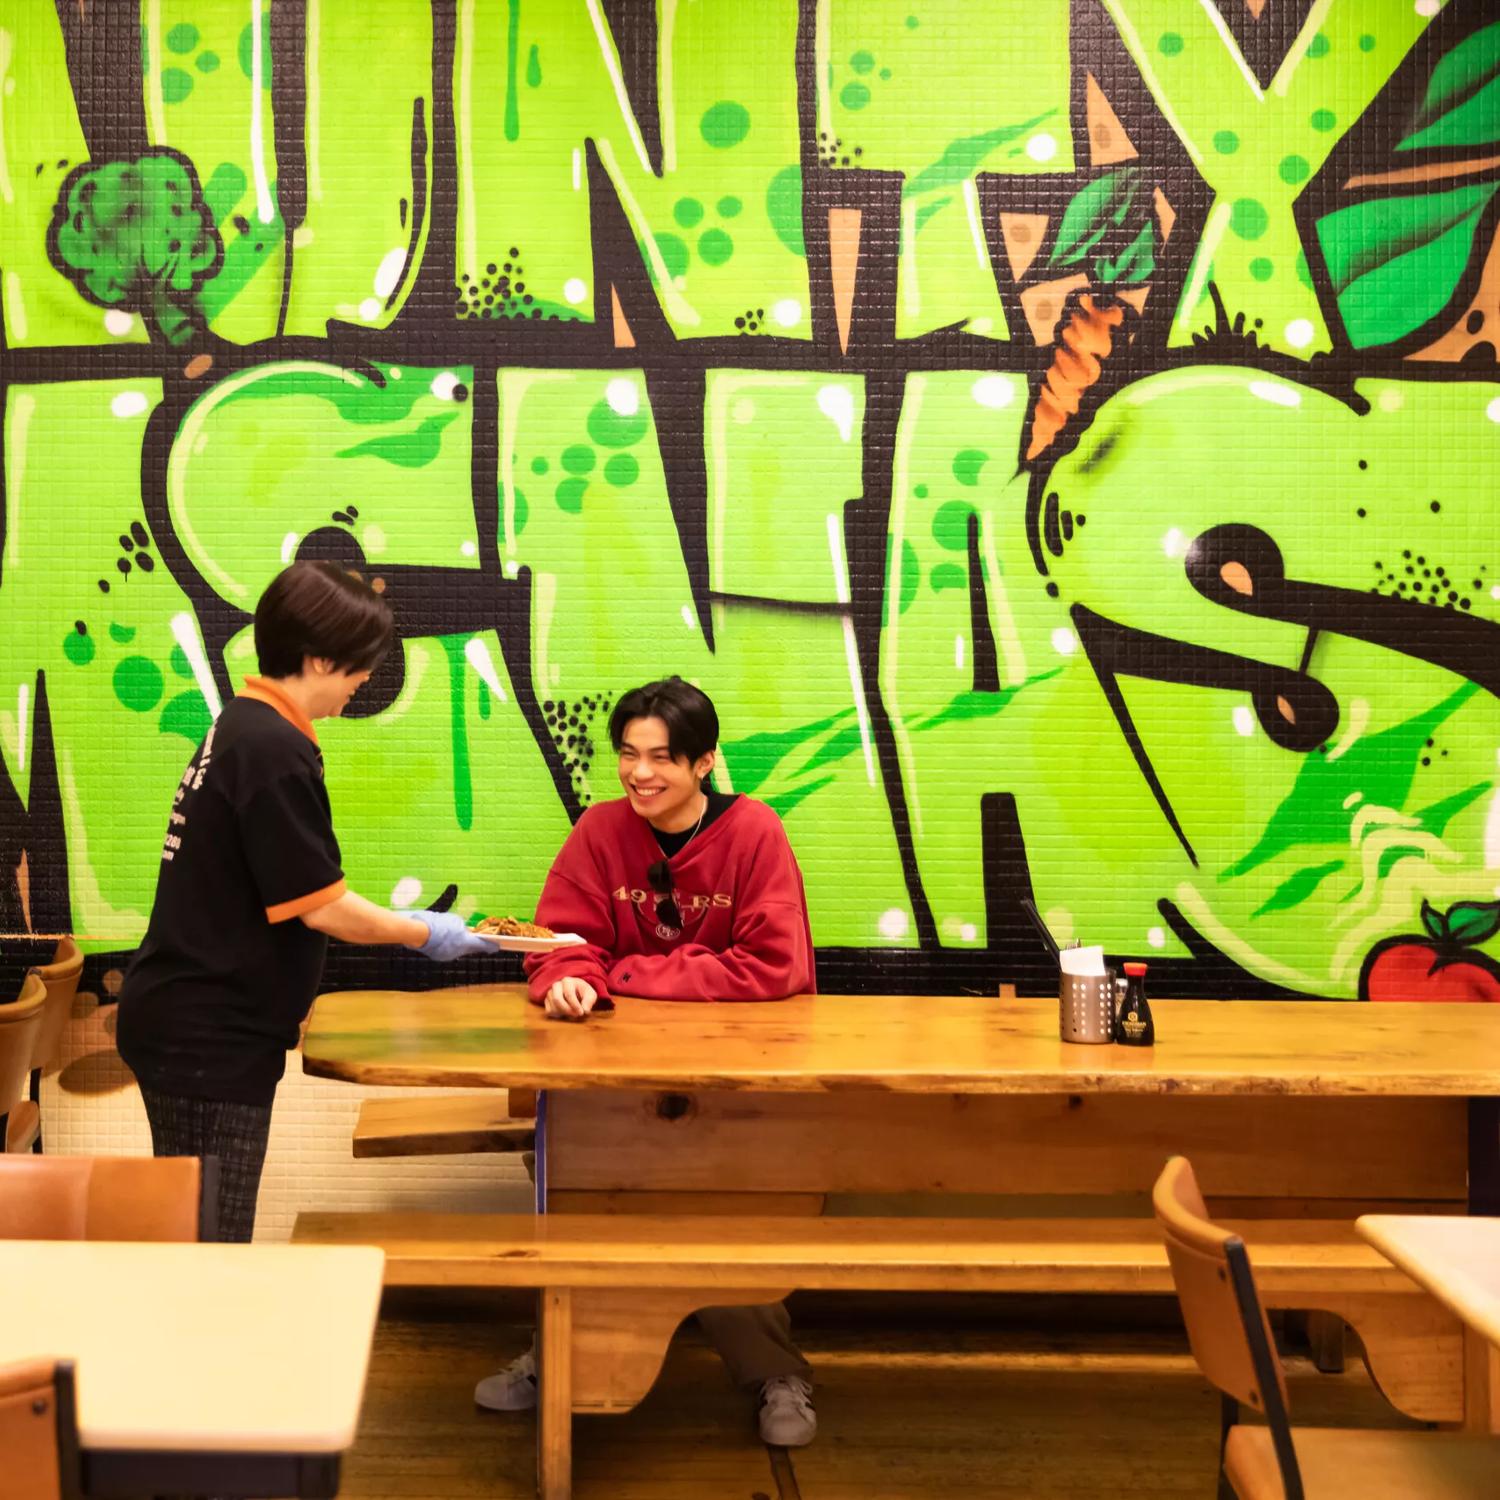 Inside Aunty Mena's Vegetarian Restaurant & Café, a popular Malaysian restaurant on Cuba Street in Te Aro, Wellington. A worker wearing black hands a dish to a smiling customer at a large wooden table and the restaurant's name is graffitied in big lime gr